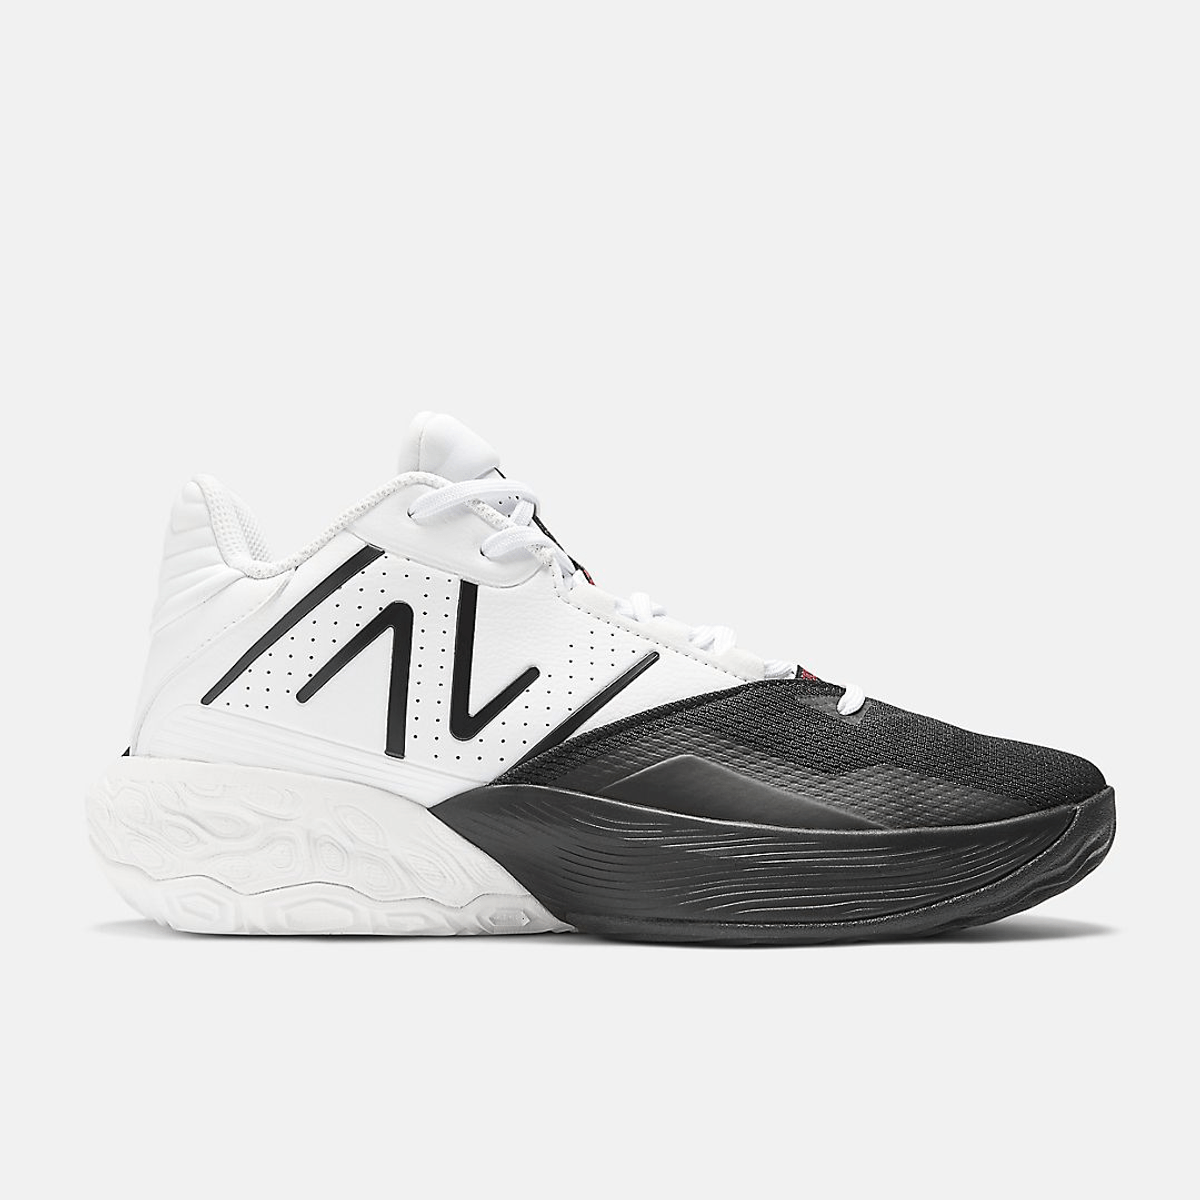 New Balances Introduces The Latest TWO WXY V4